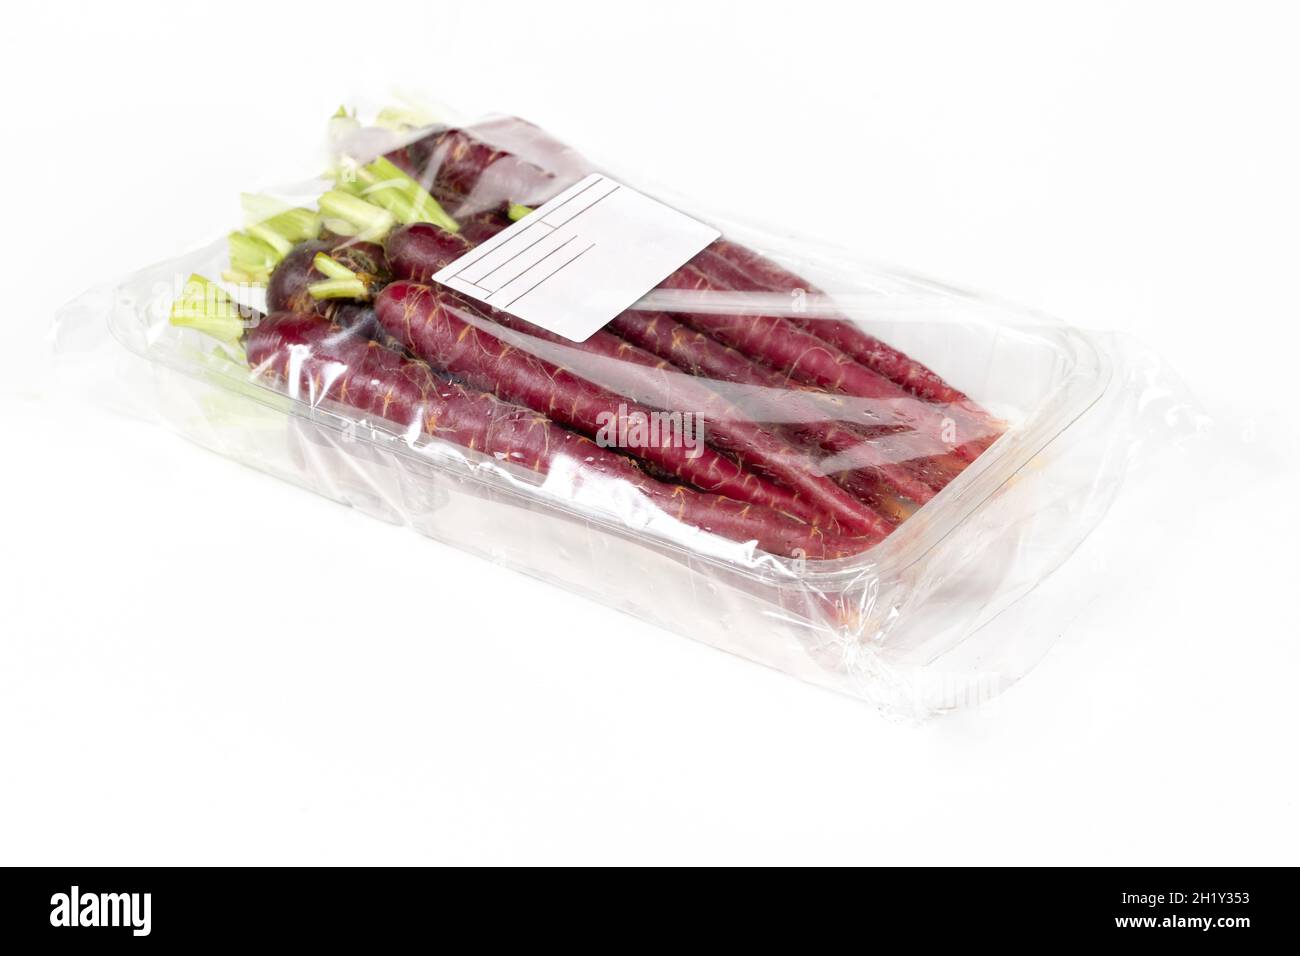 Mini red carrots in labeled packaging on a white background Stock Photo